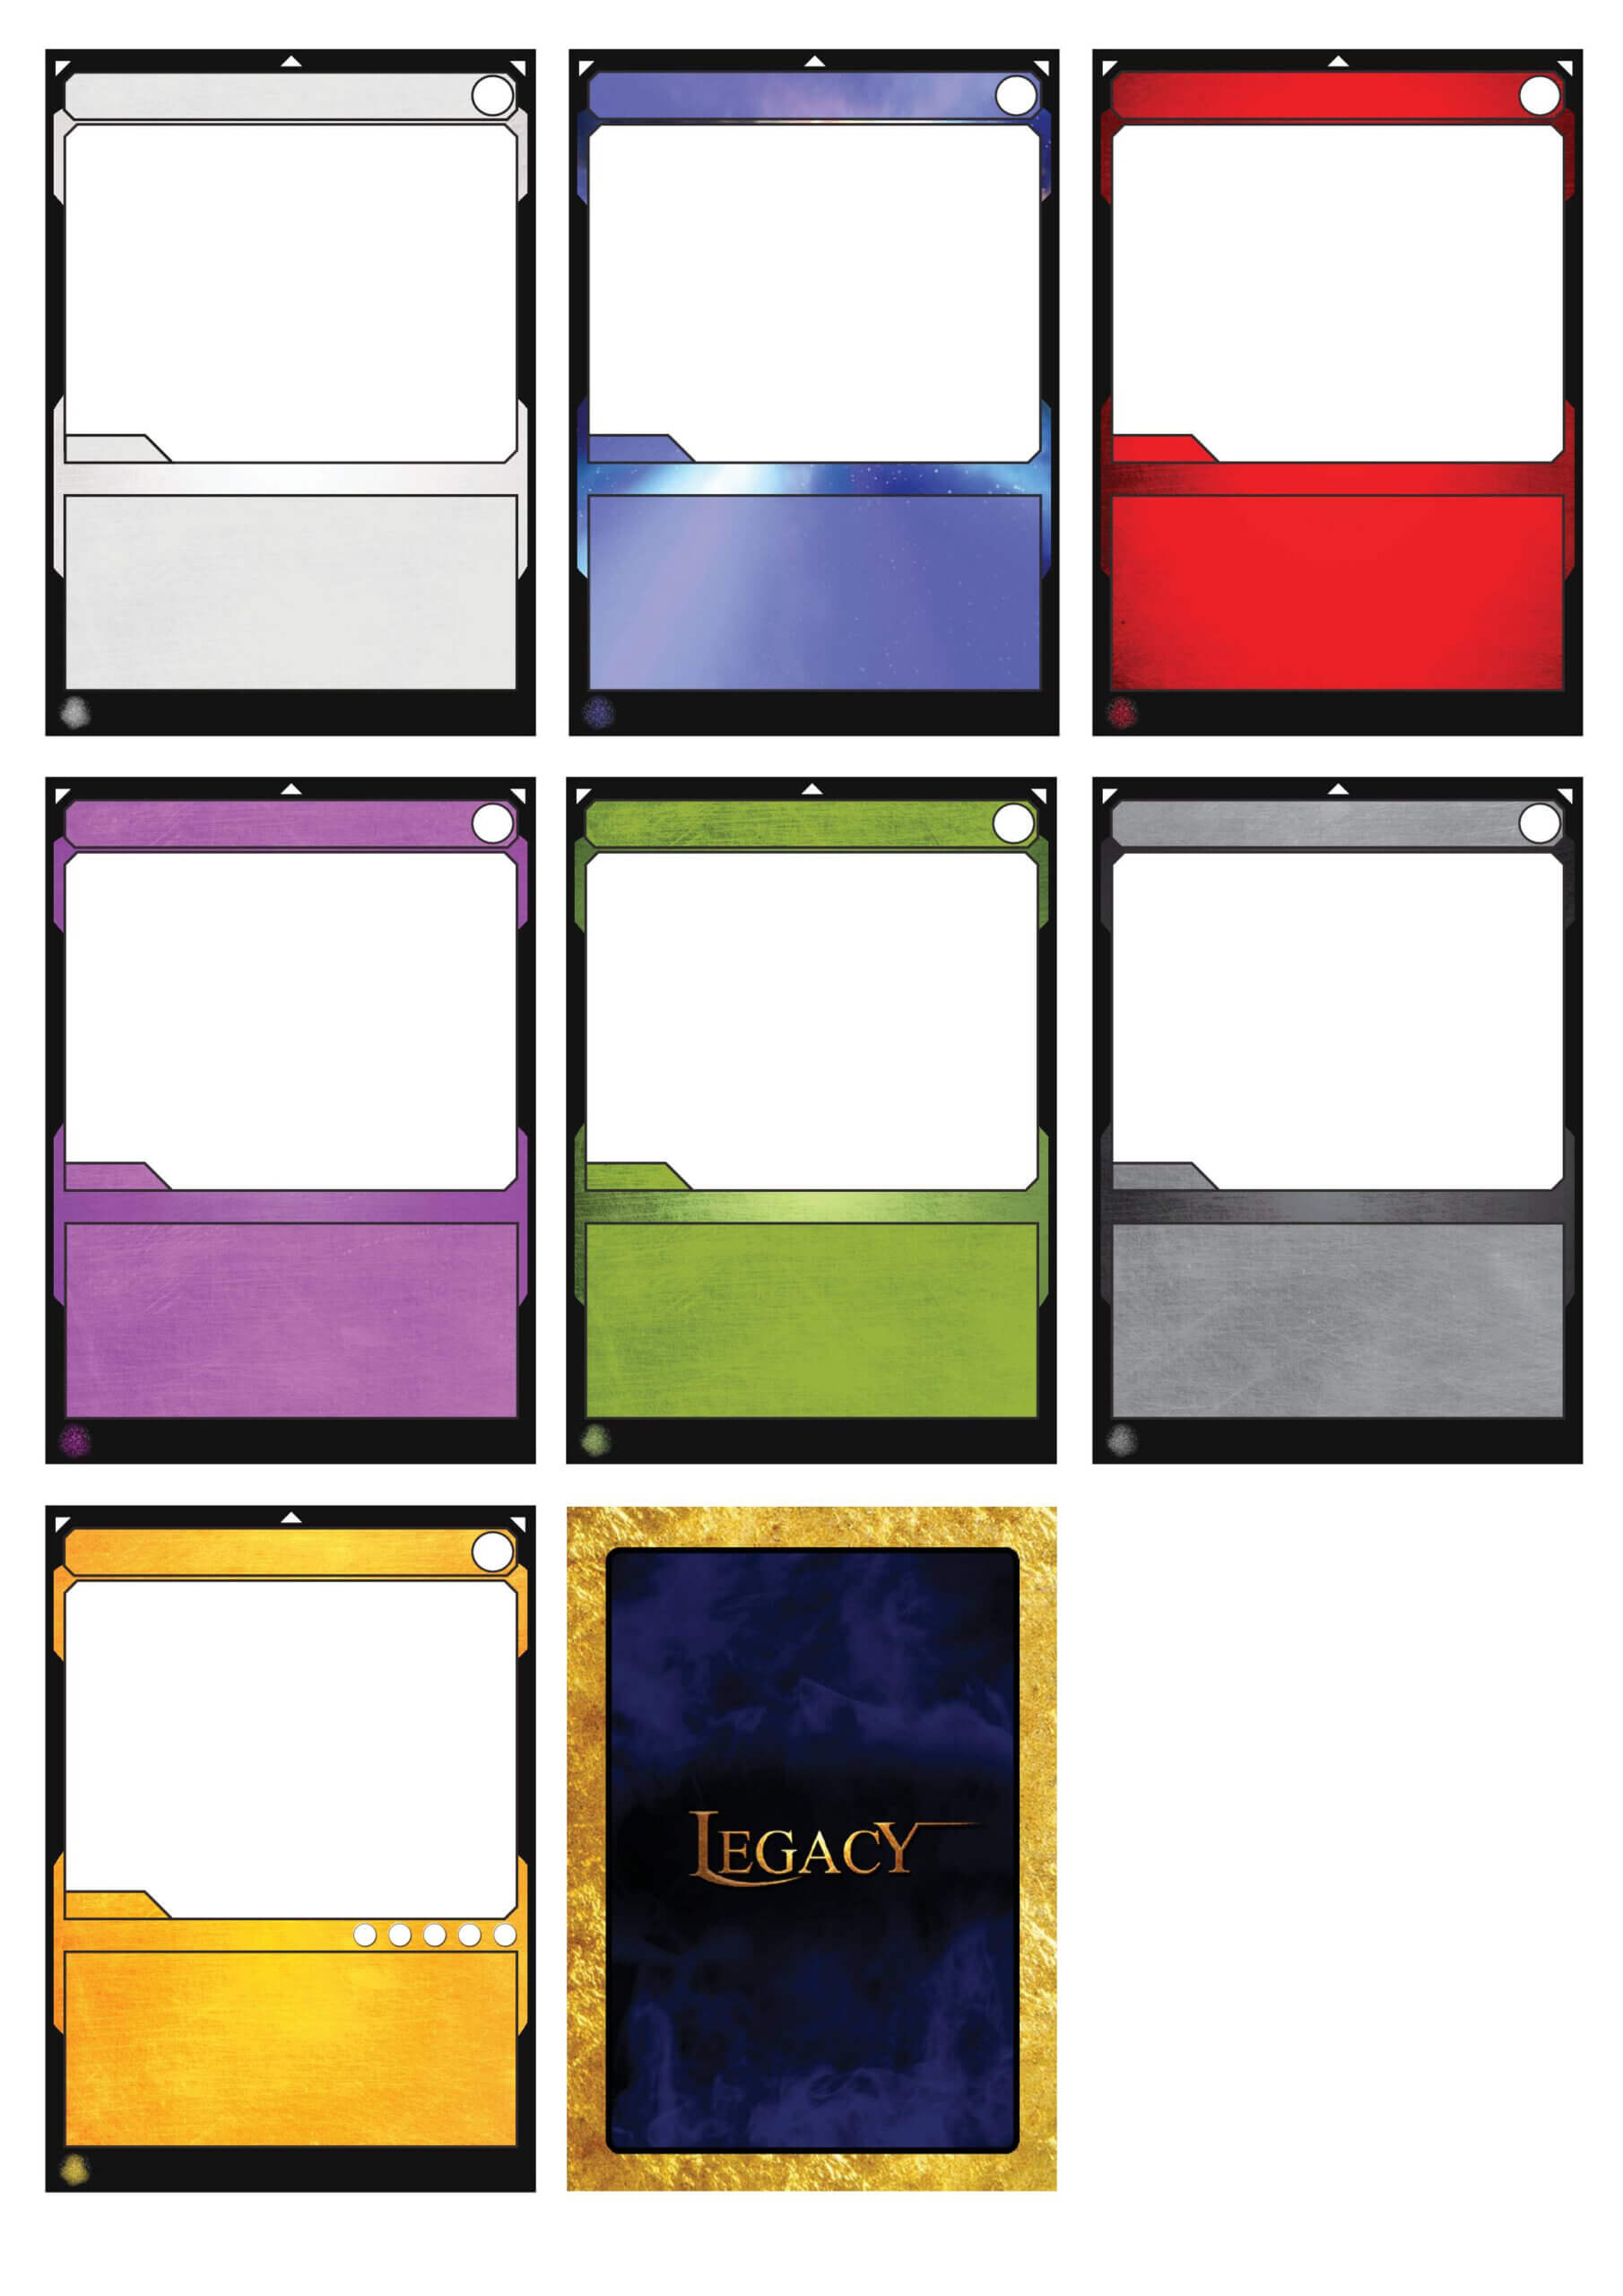 025 Template Ideas Board Game Cards 314204 Free Trading Card Pertaining To Template For Game Cards